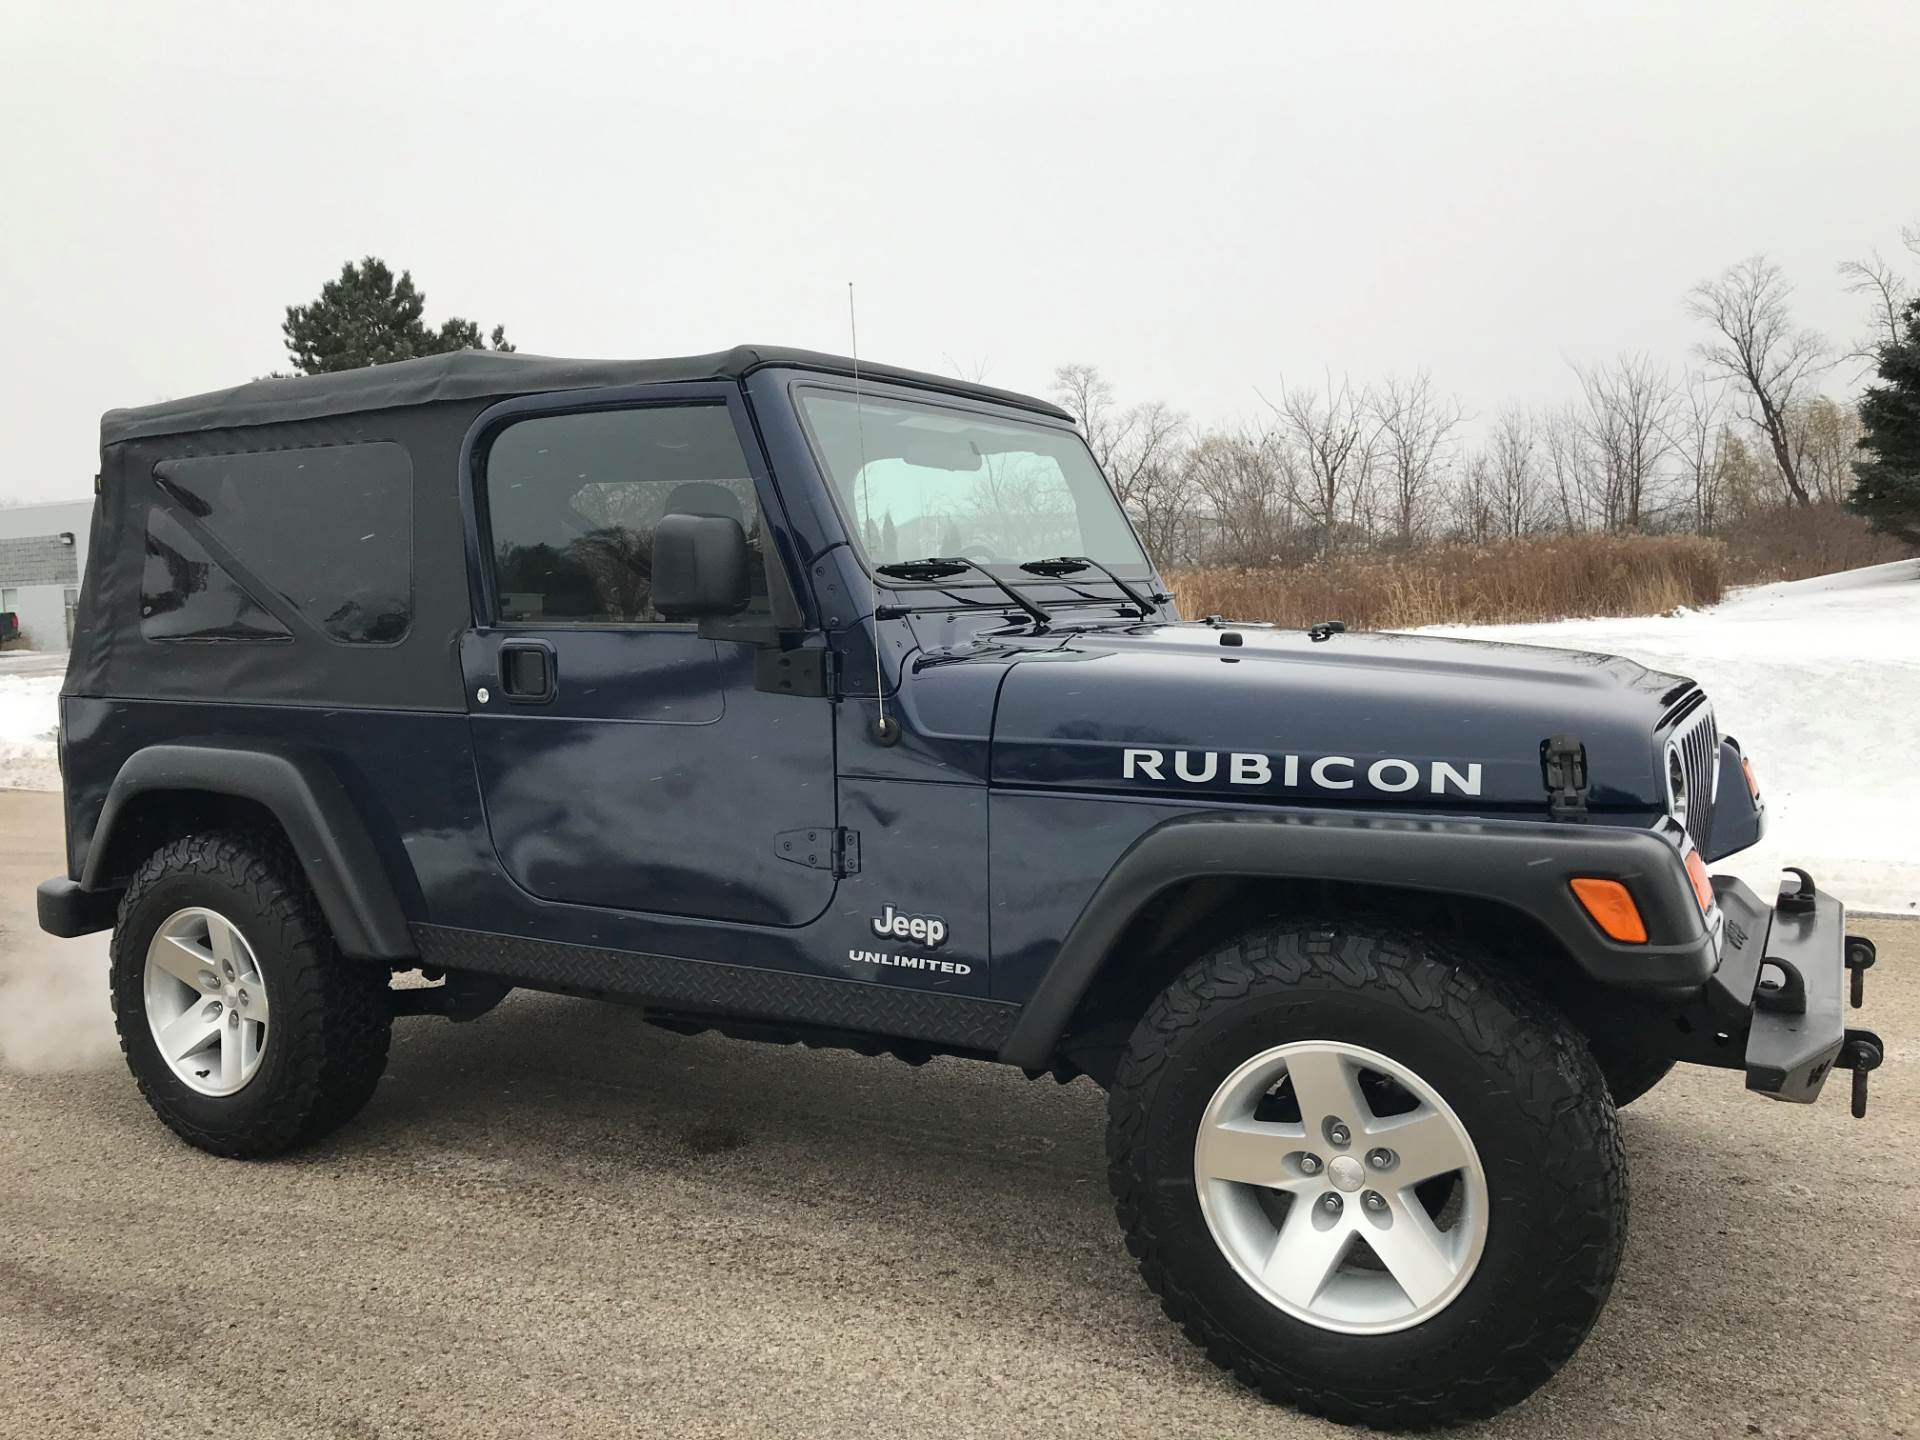 2006 Jeep Wrangler Unlimited Rubicon 2dr SUV 4WD in Big Bend, Wisconsin - Photo 73